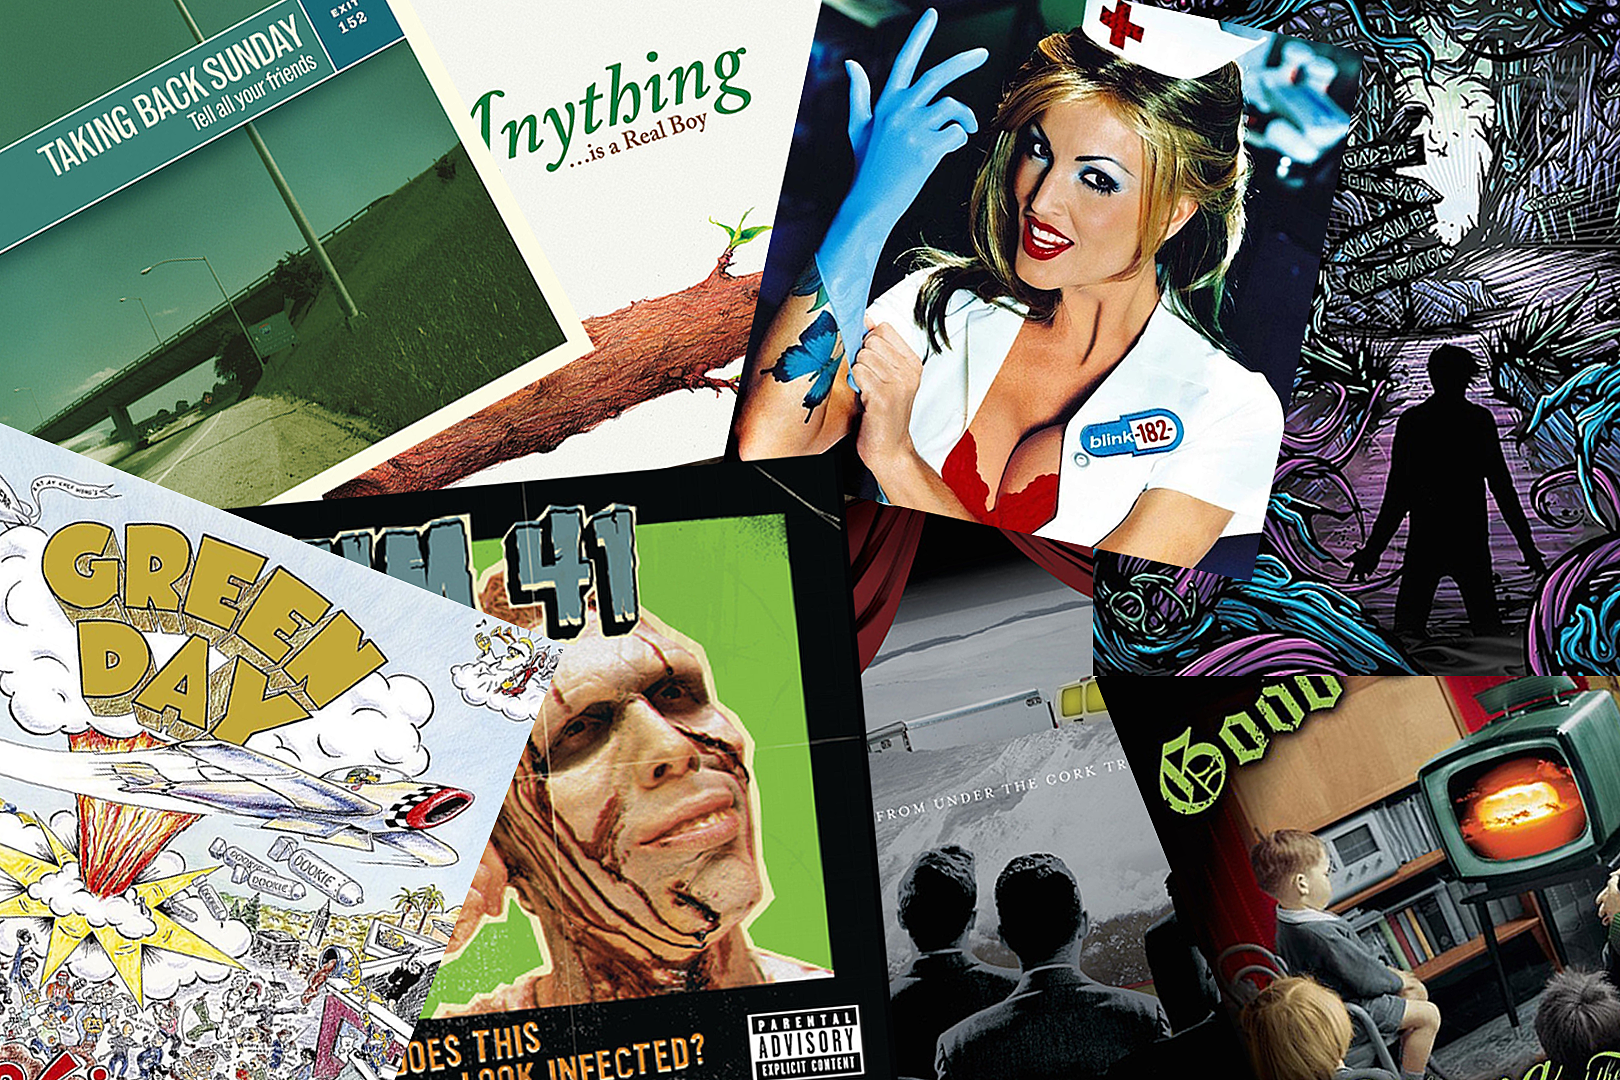 The 50 Greatest Pop-Punk Albums of All Time — Ranked